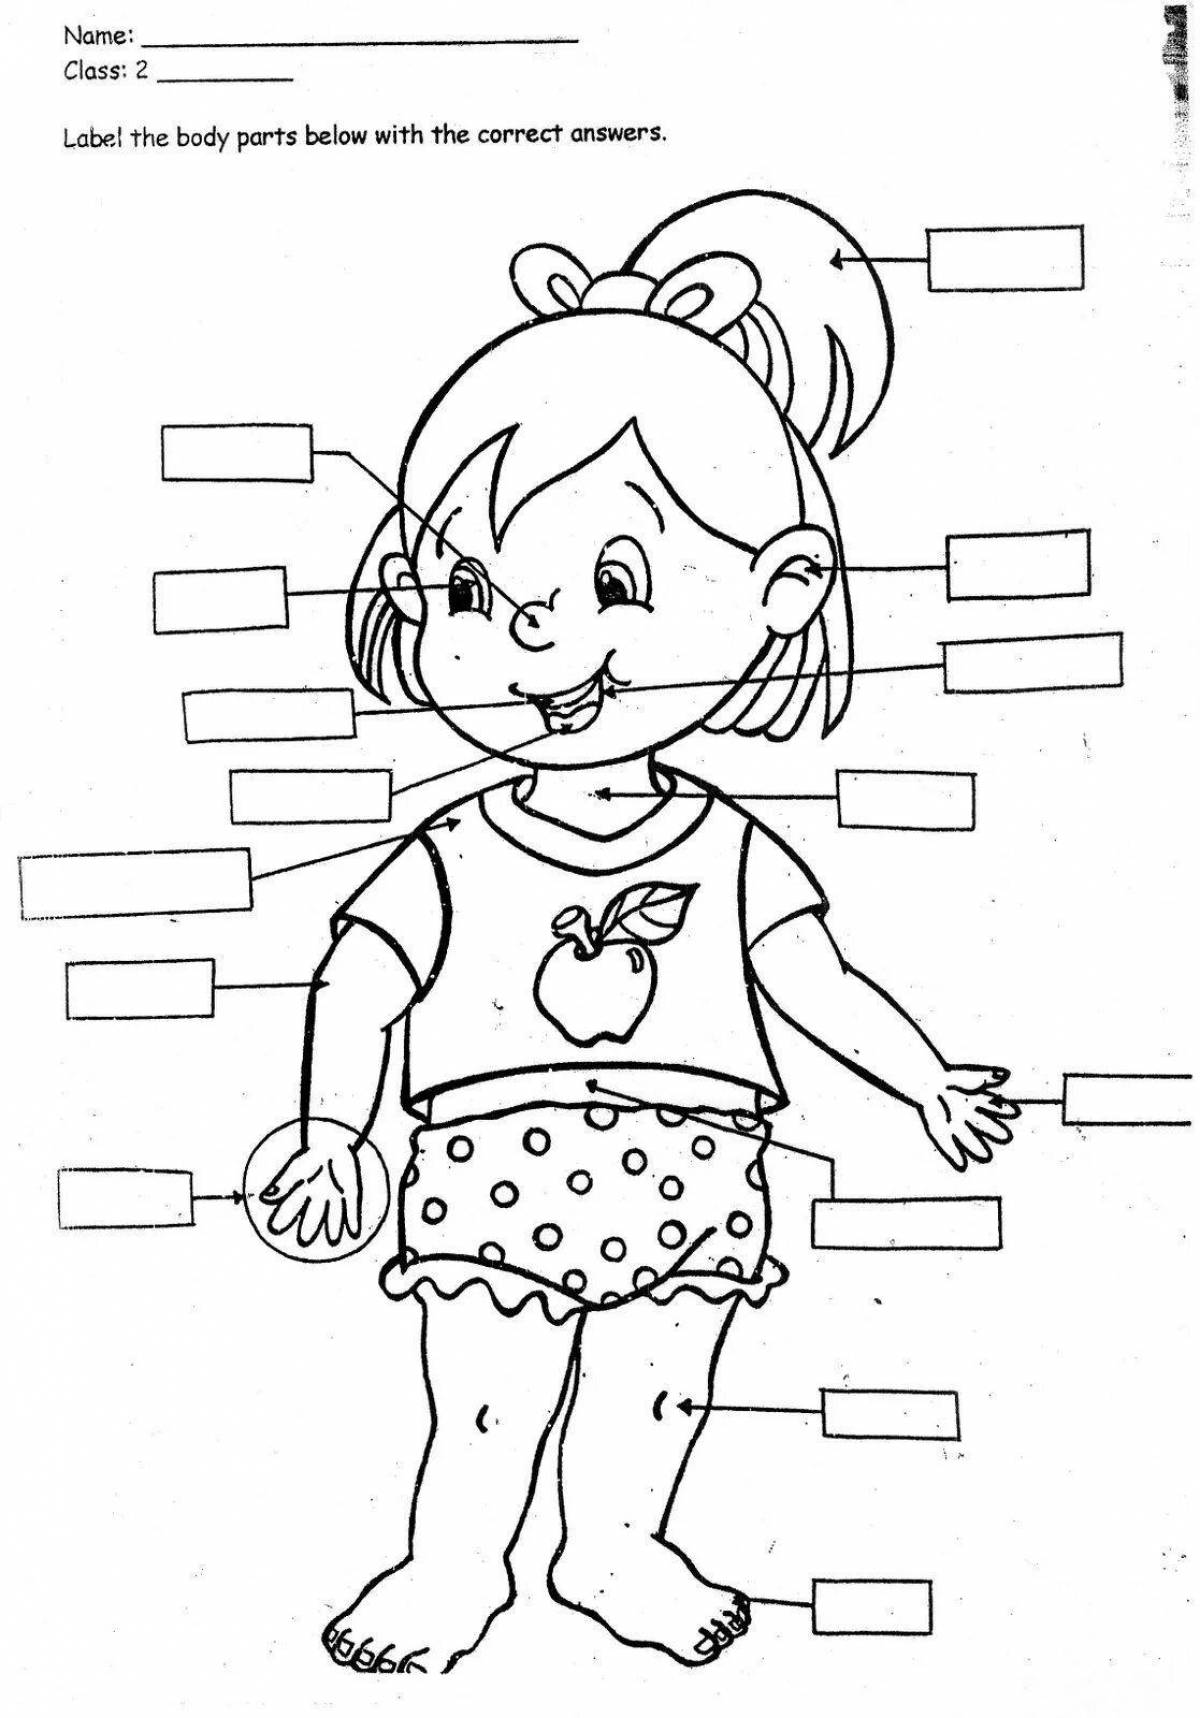 Attractive parts of the body coloring page